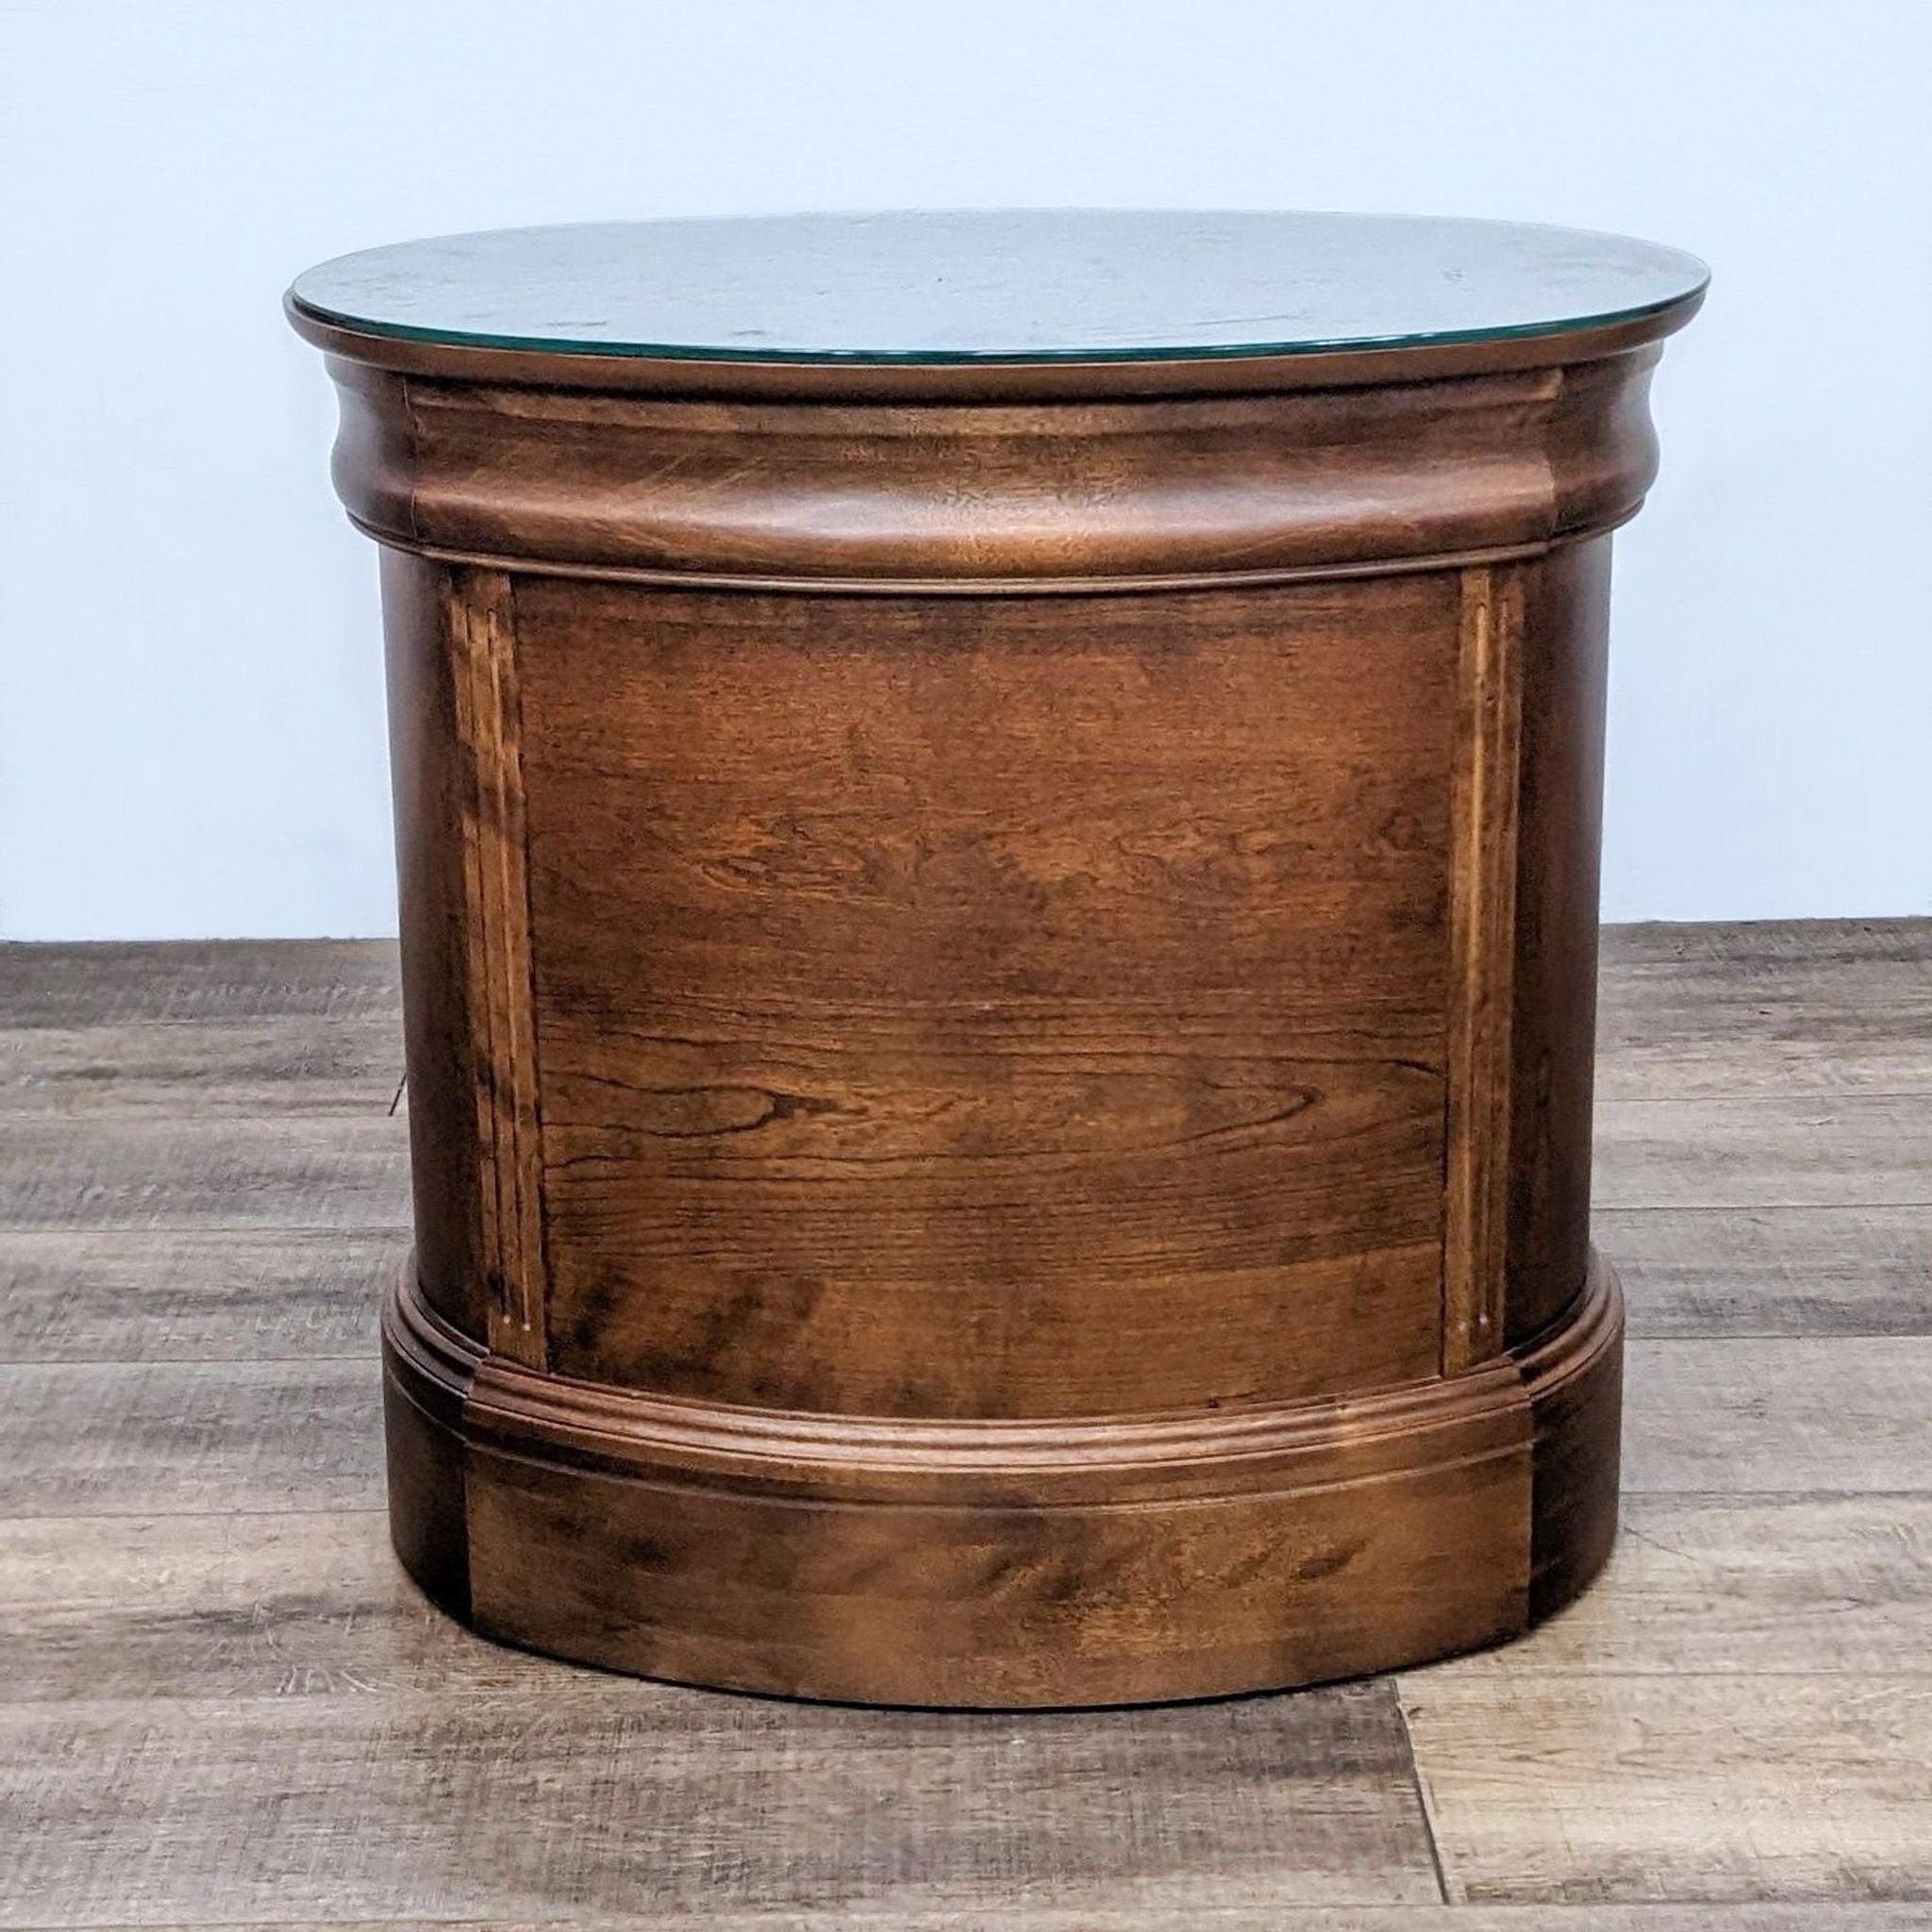 Reperch end table with a cylindrical wooden base and a round glass protective top on a wooden floor.